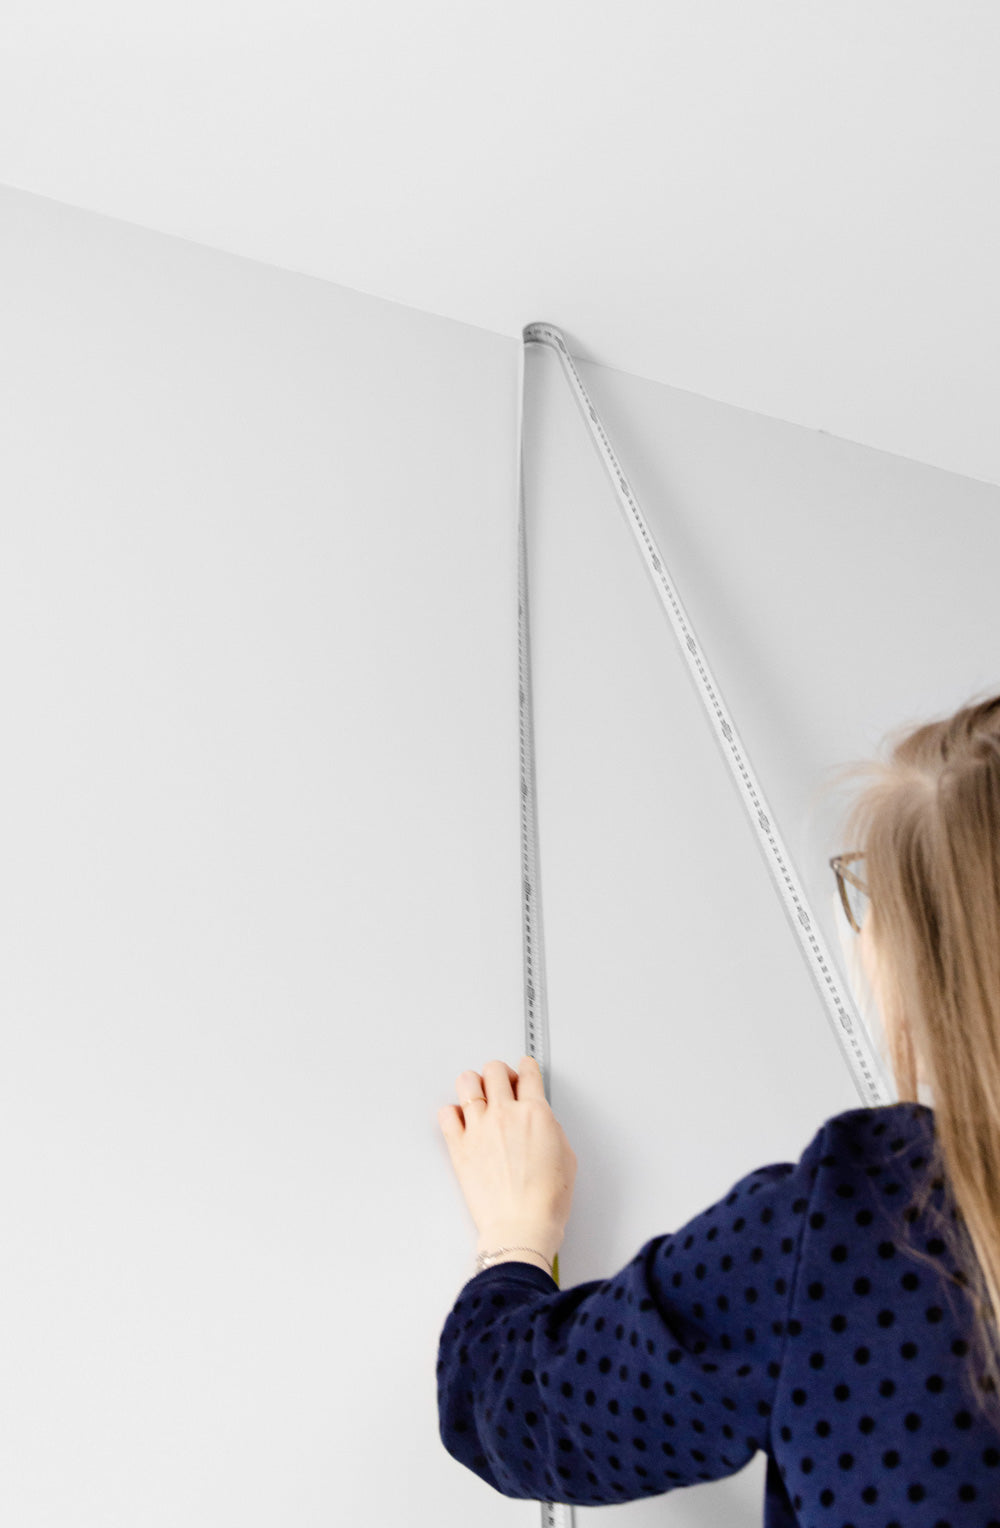 Measuring height of a wall for removable wallpaper